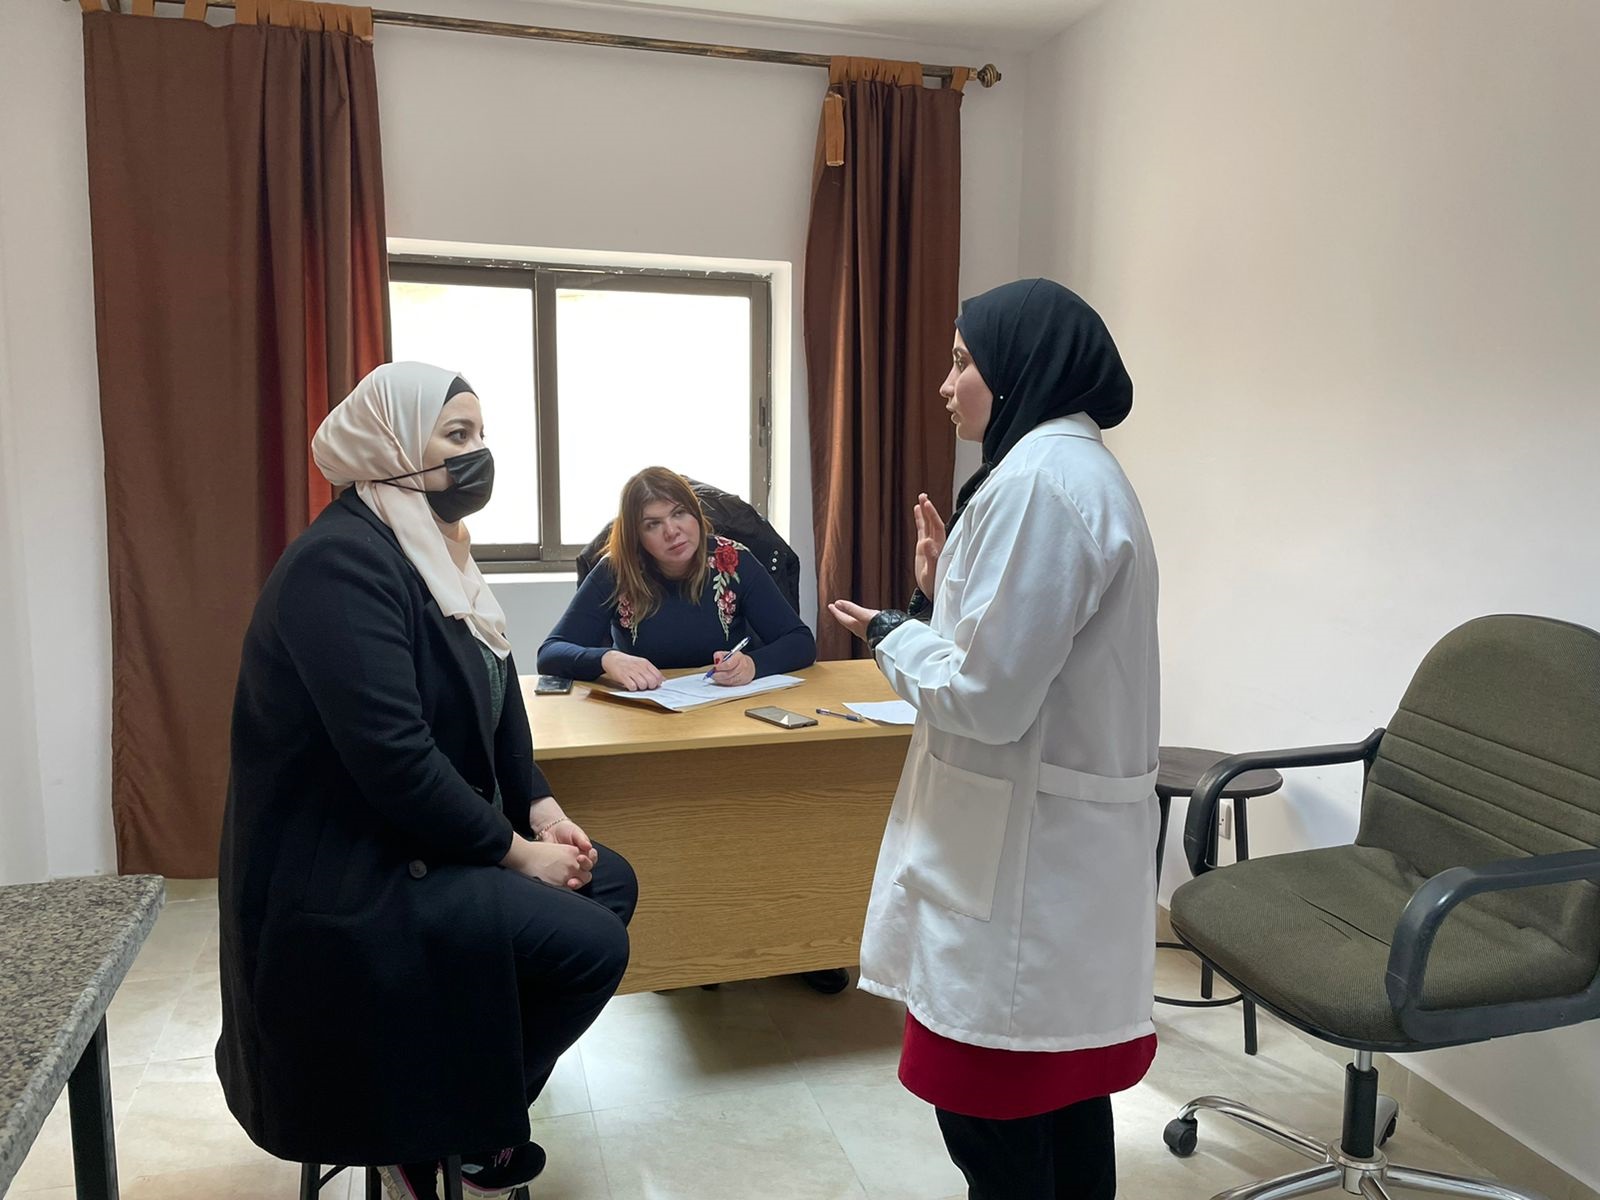 College of Pharmacy held a practical clinical skill exam OSCE